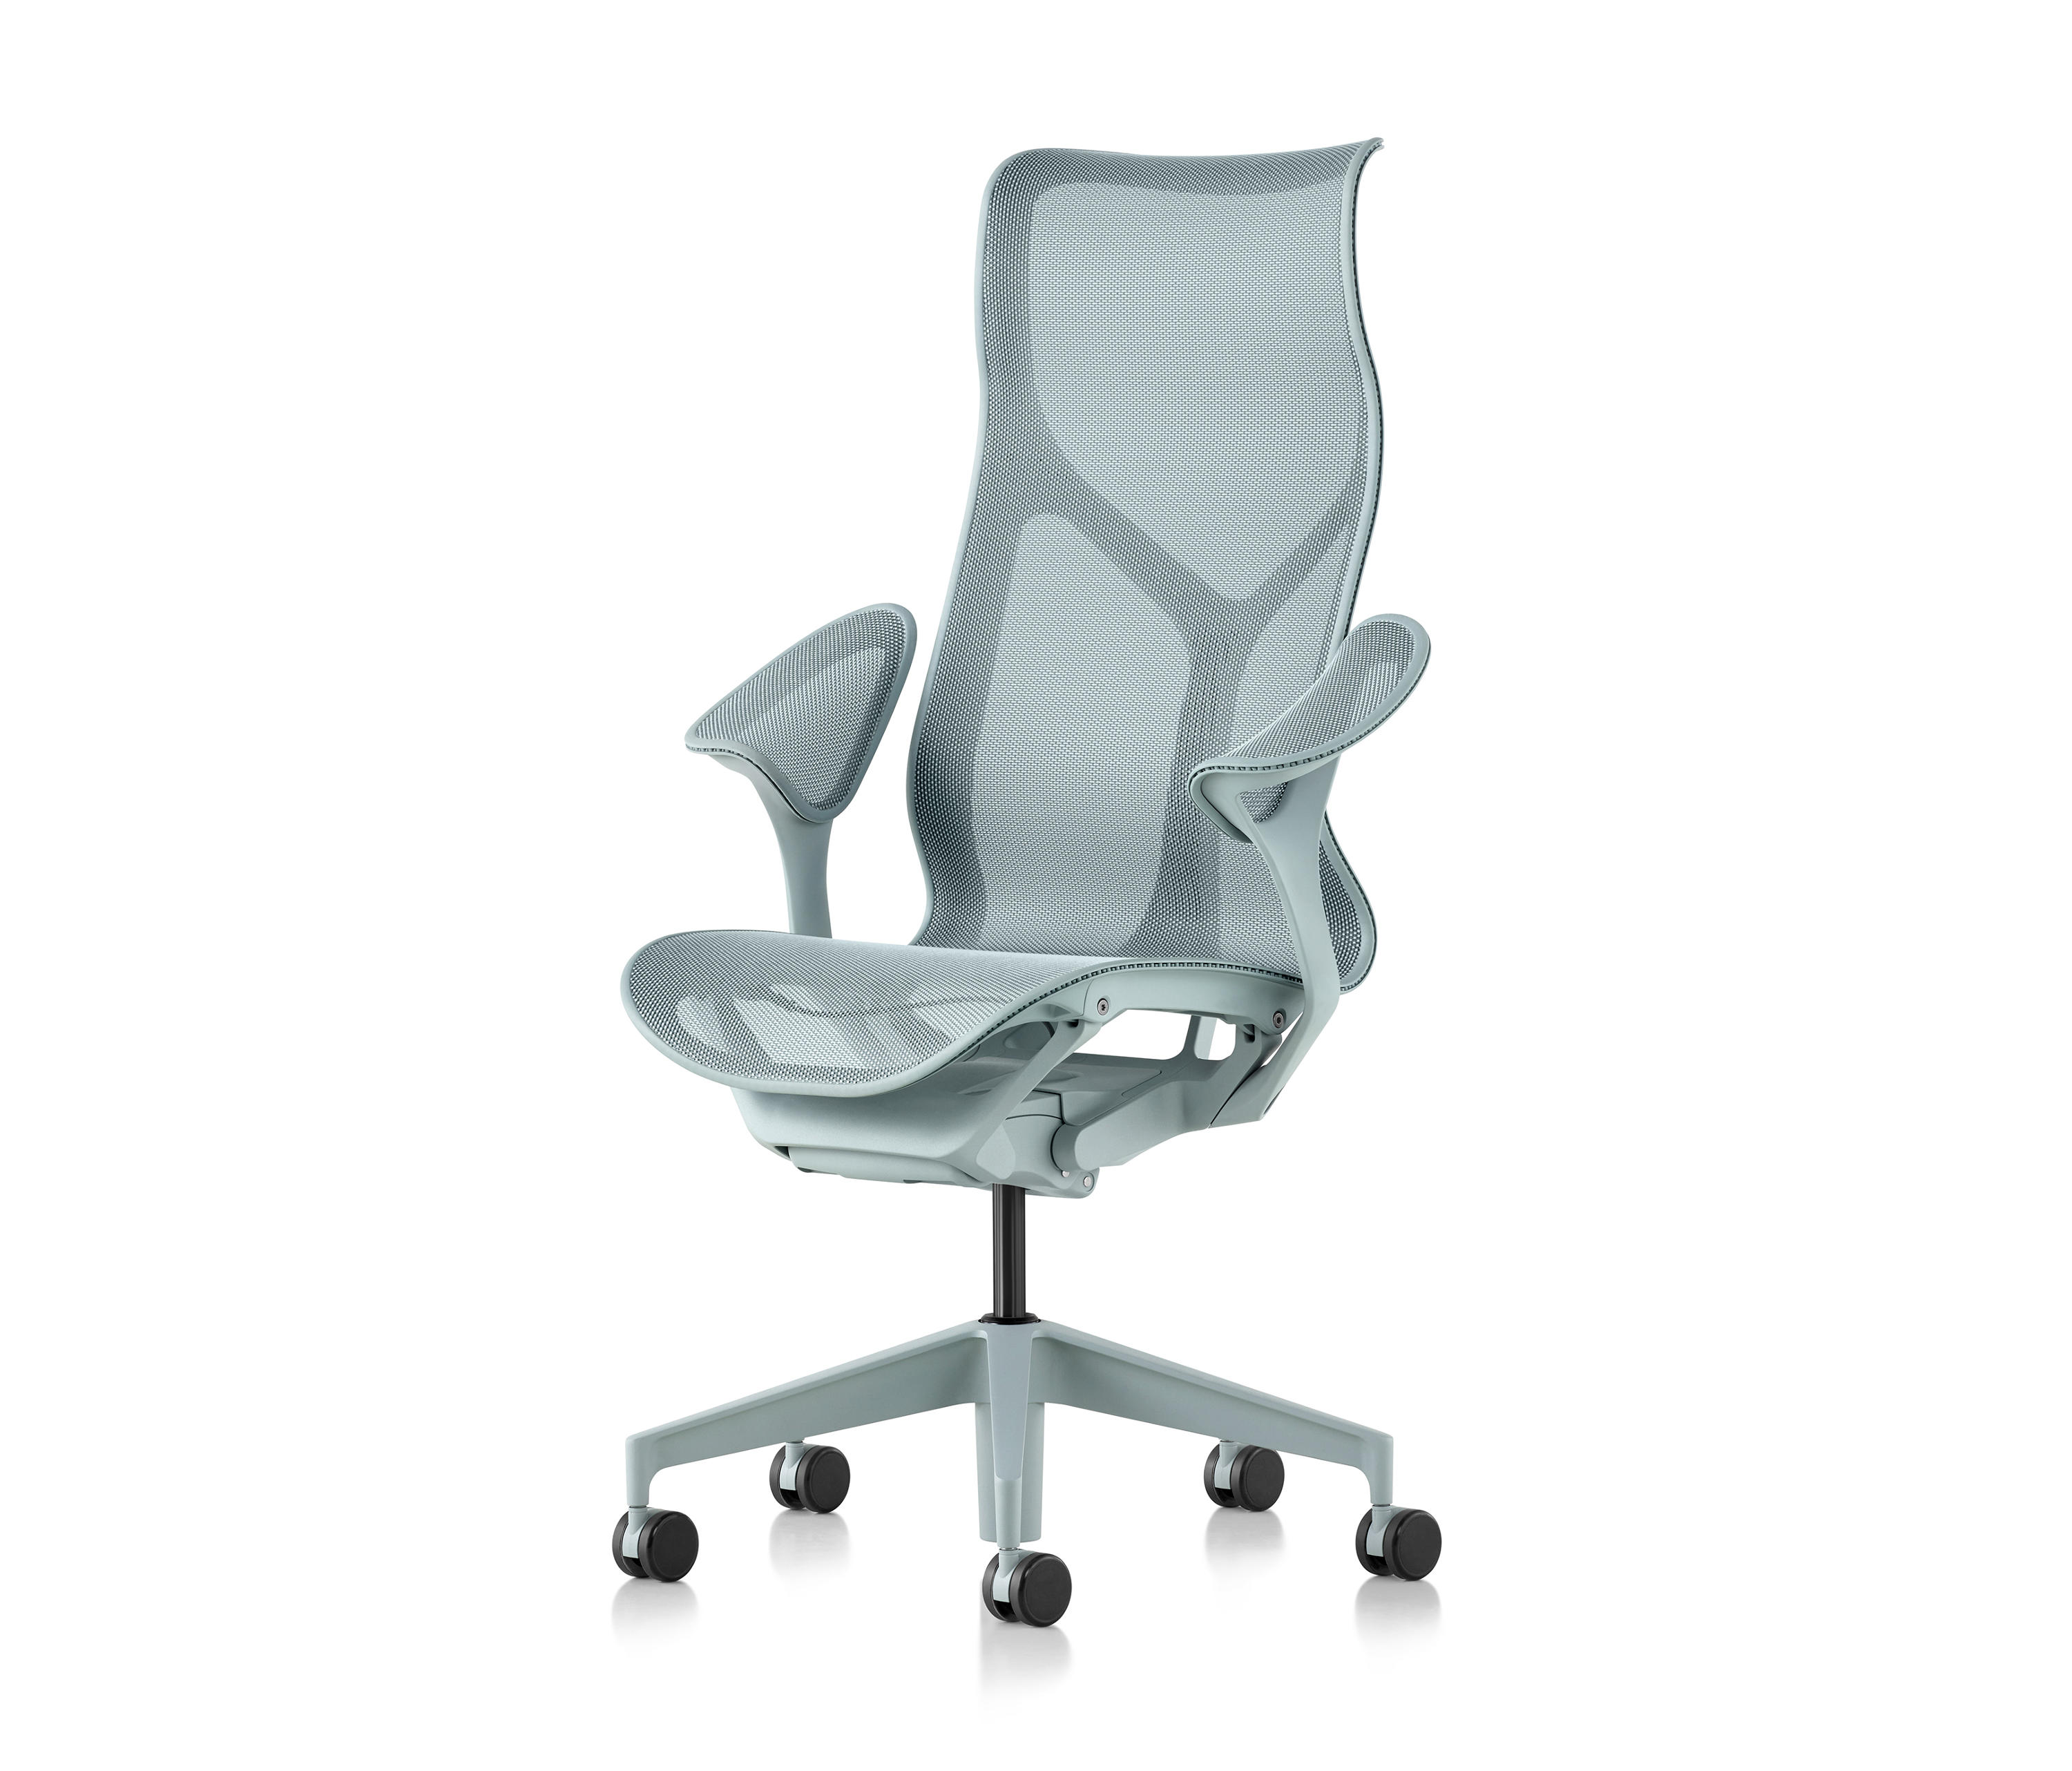 COSM HIGH BACK - Office chairs from Herman Miller | Architonic